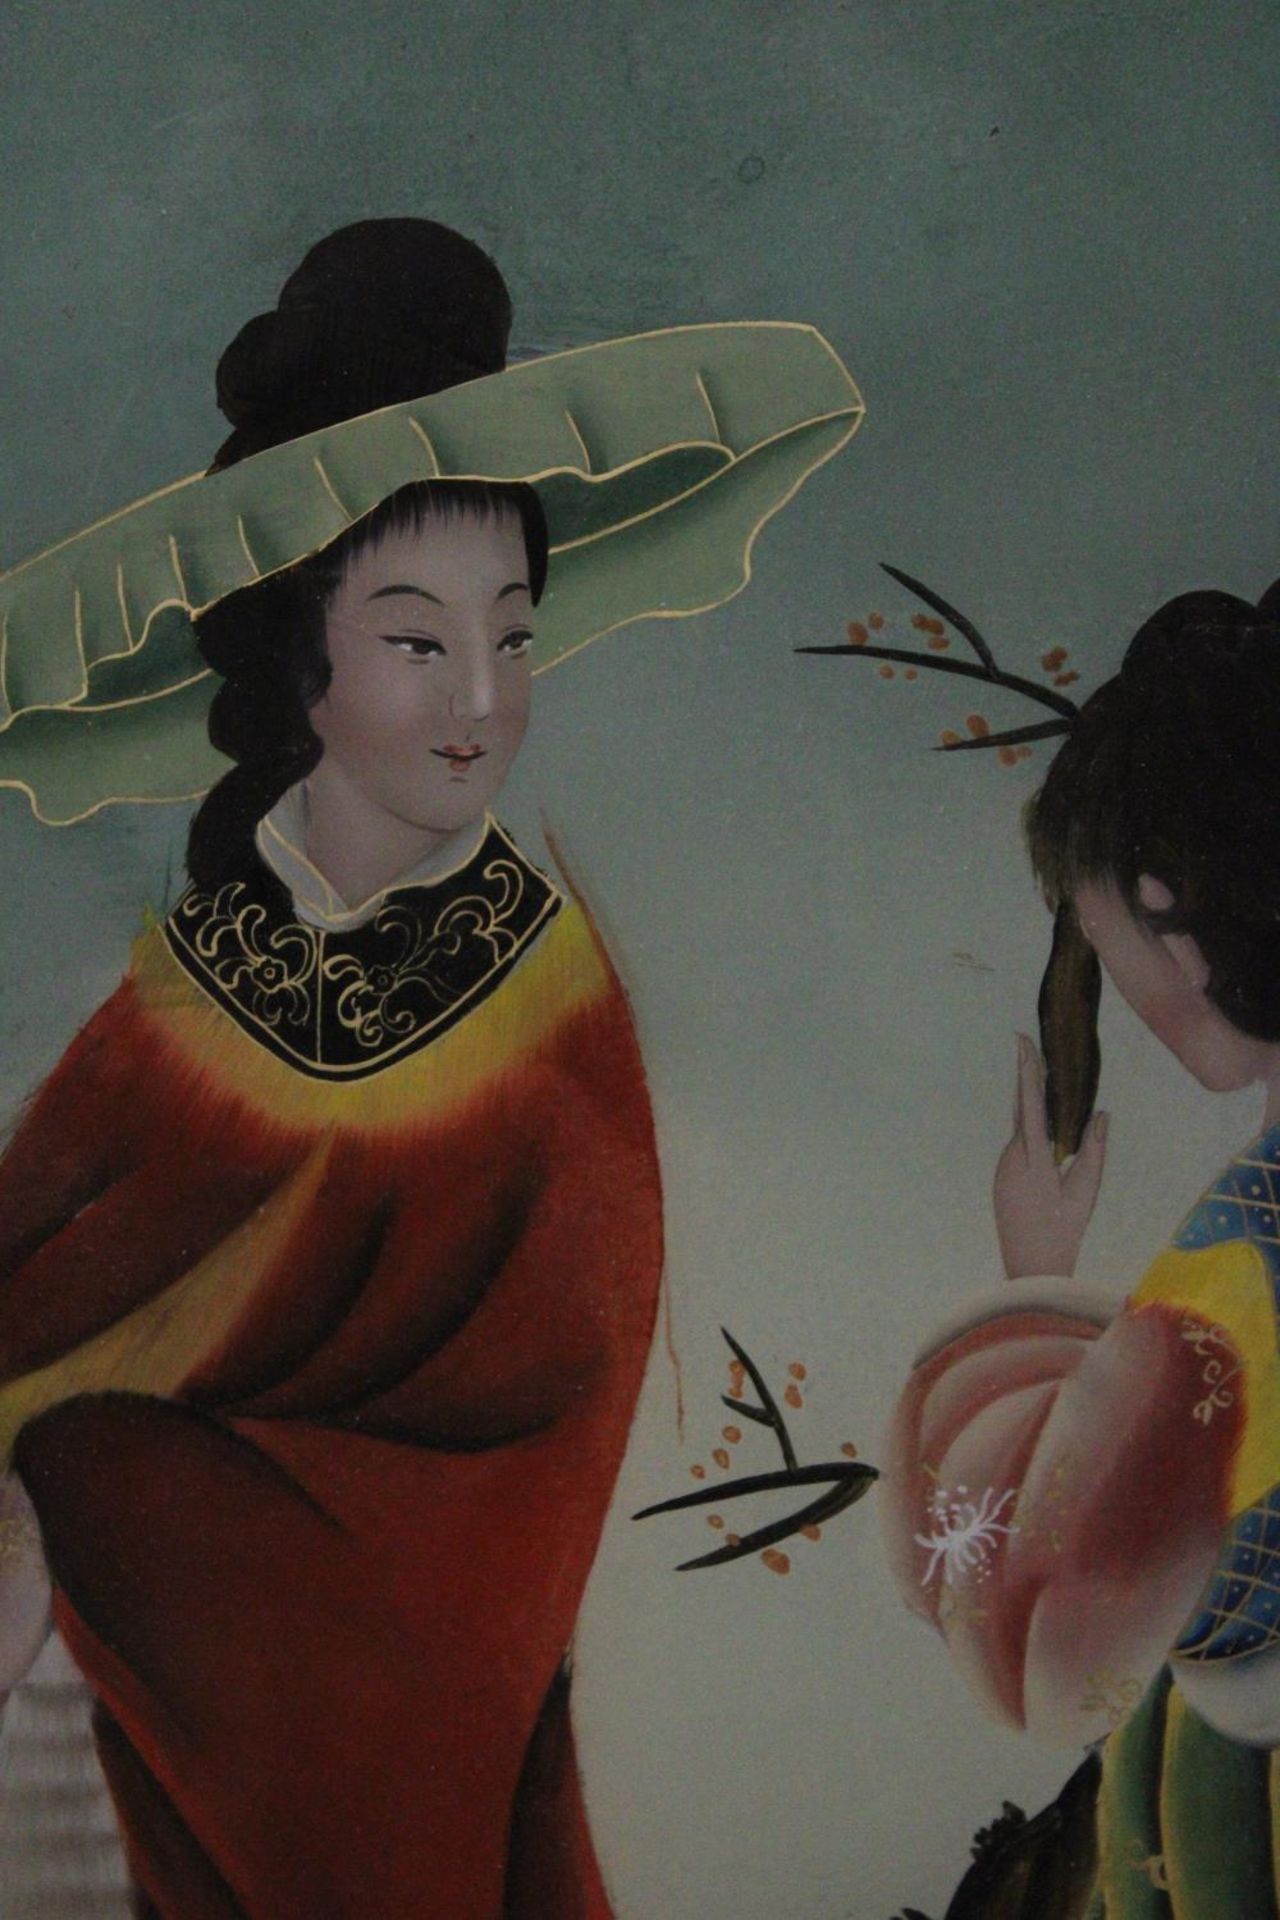 A VINTAGE JAPANESE REVERSE GLASS PAINTING OF TWO YOUNG GIRLS - Image 2 of 4